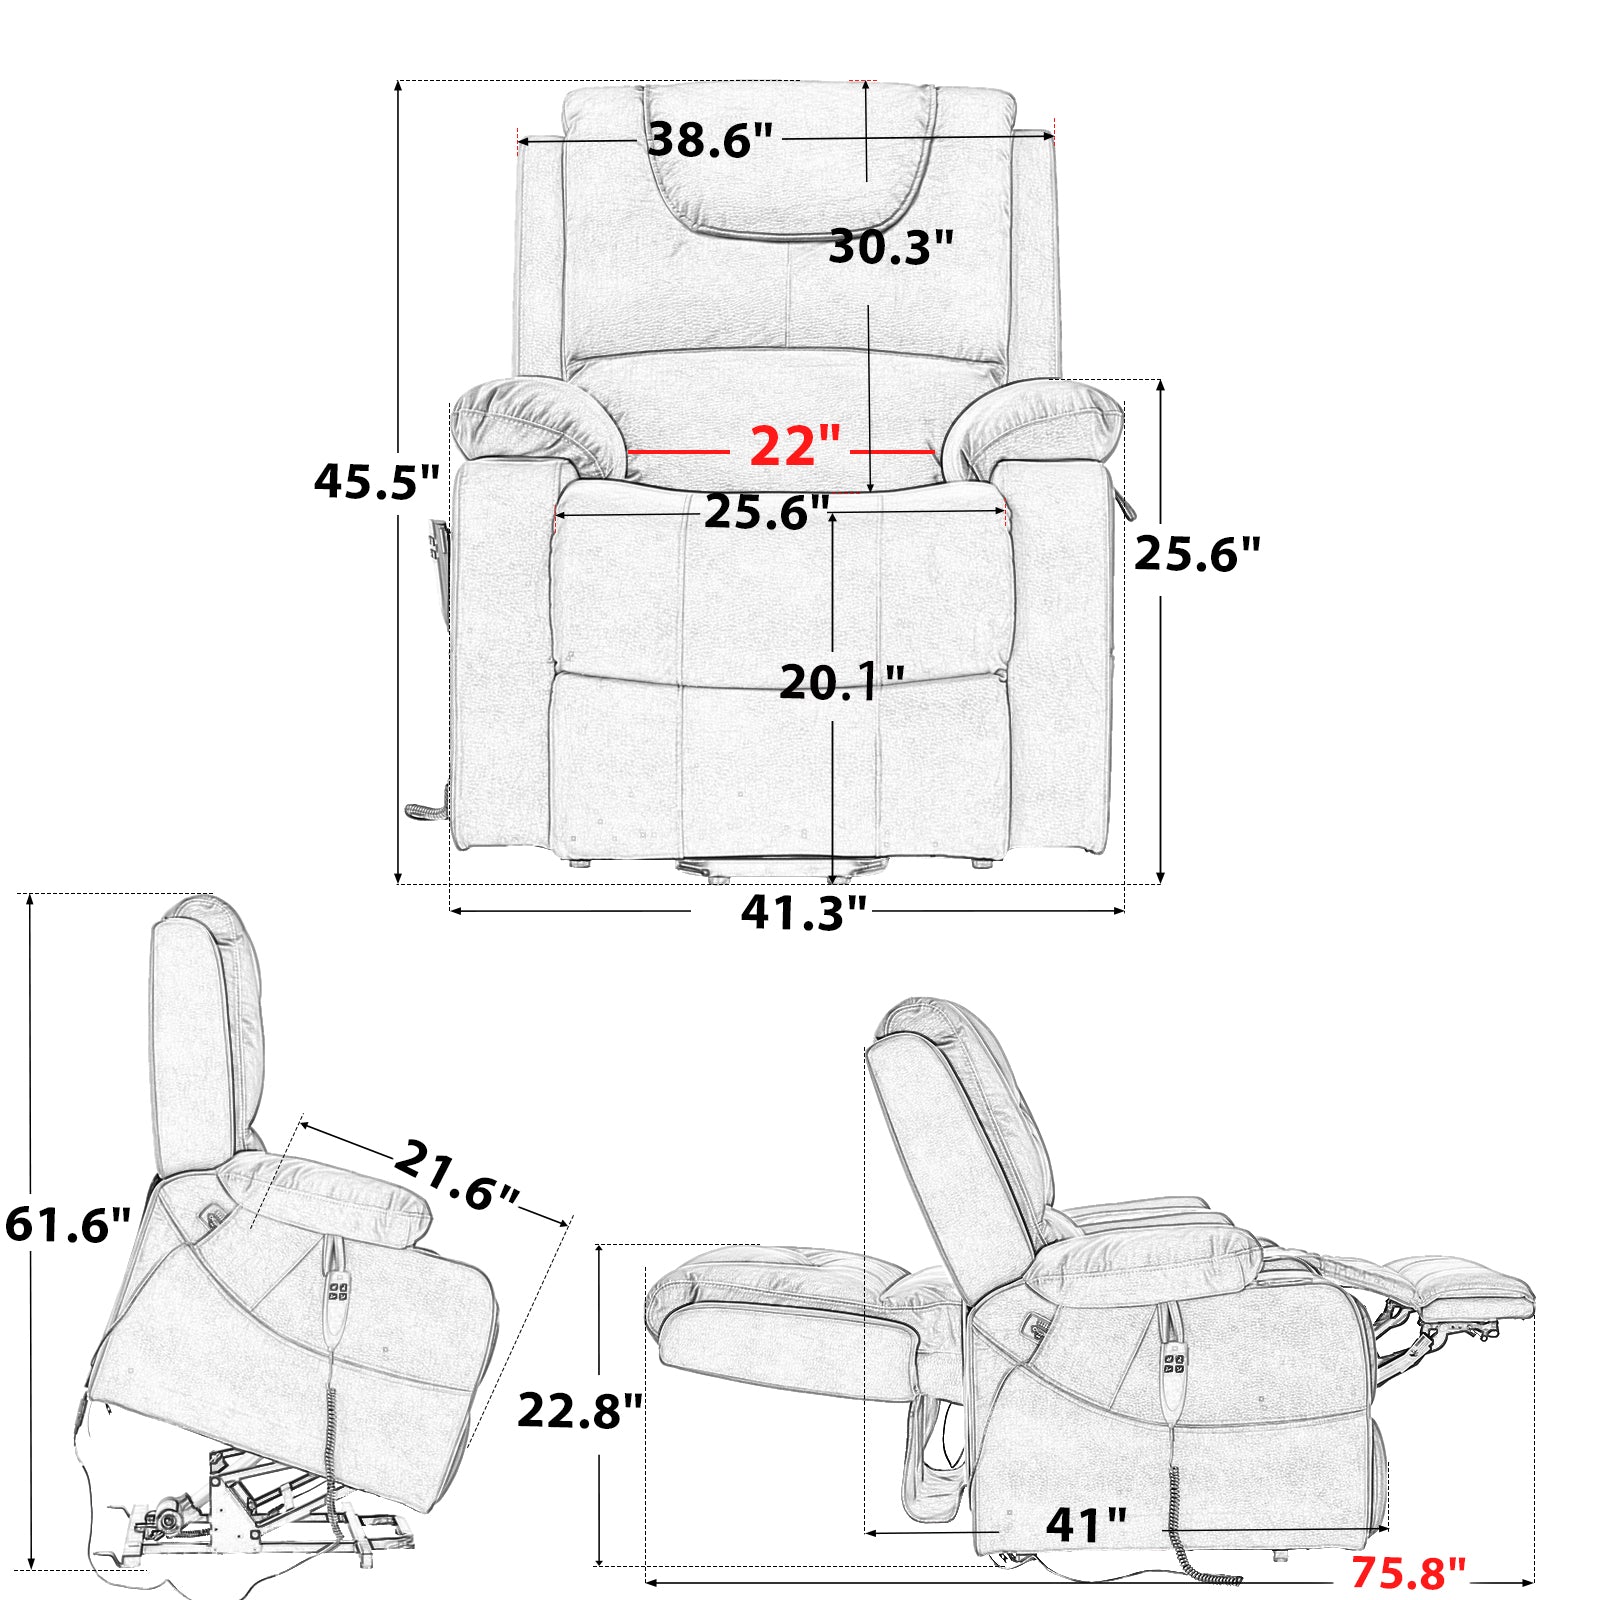 9196E Weights & Dimensions